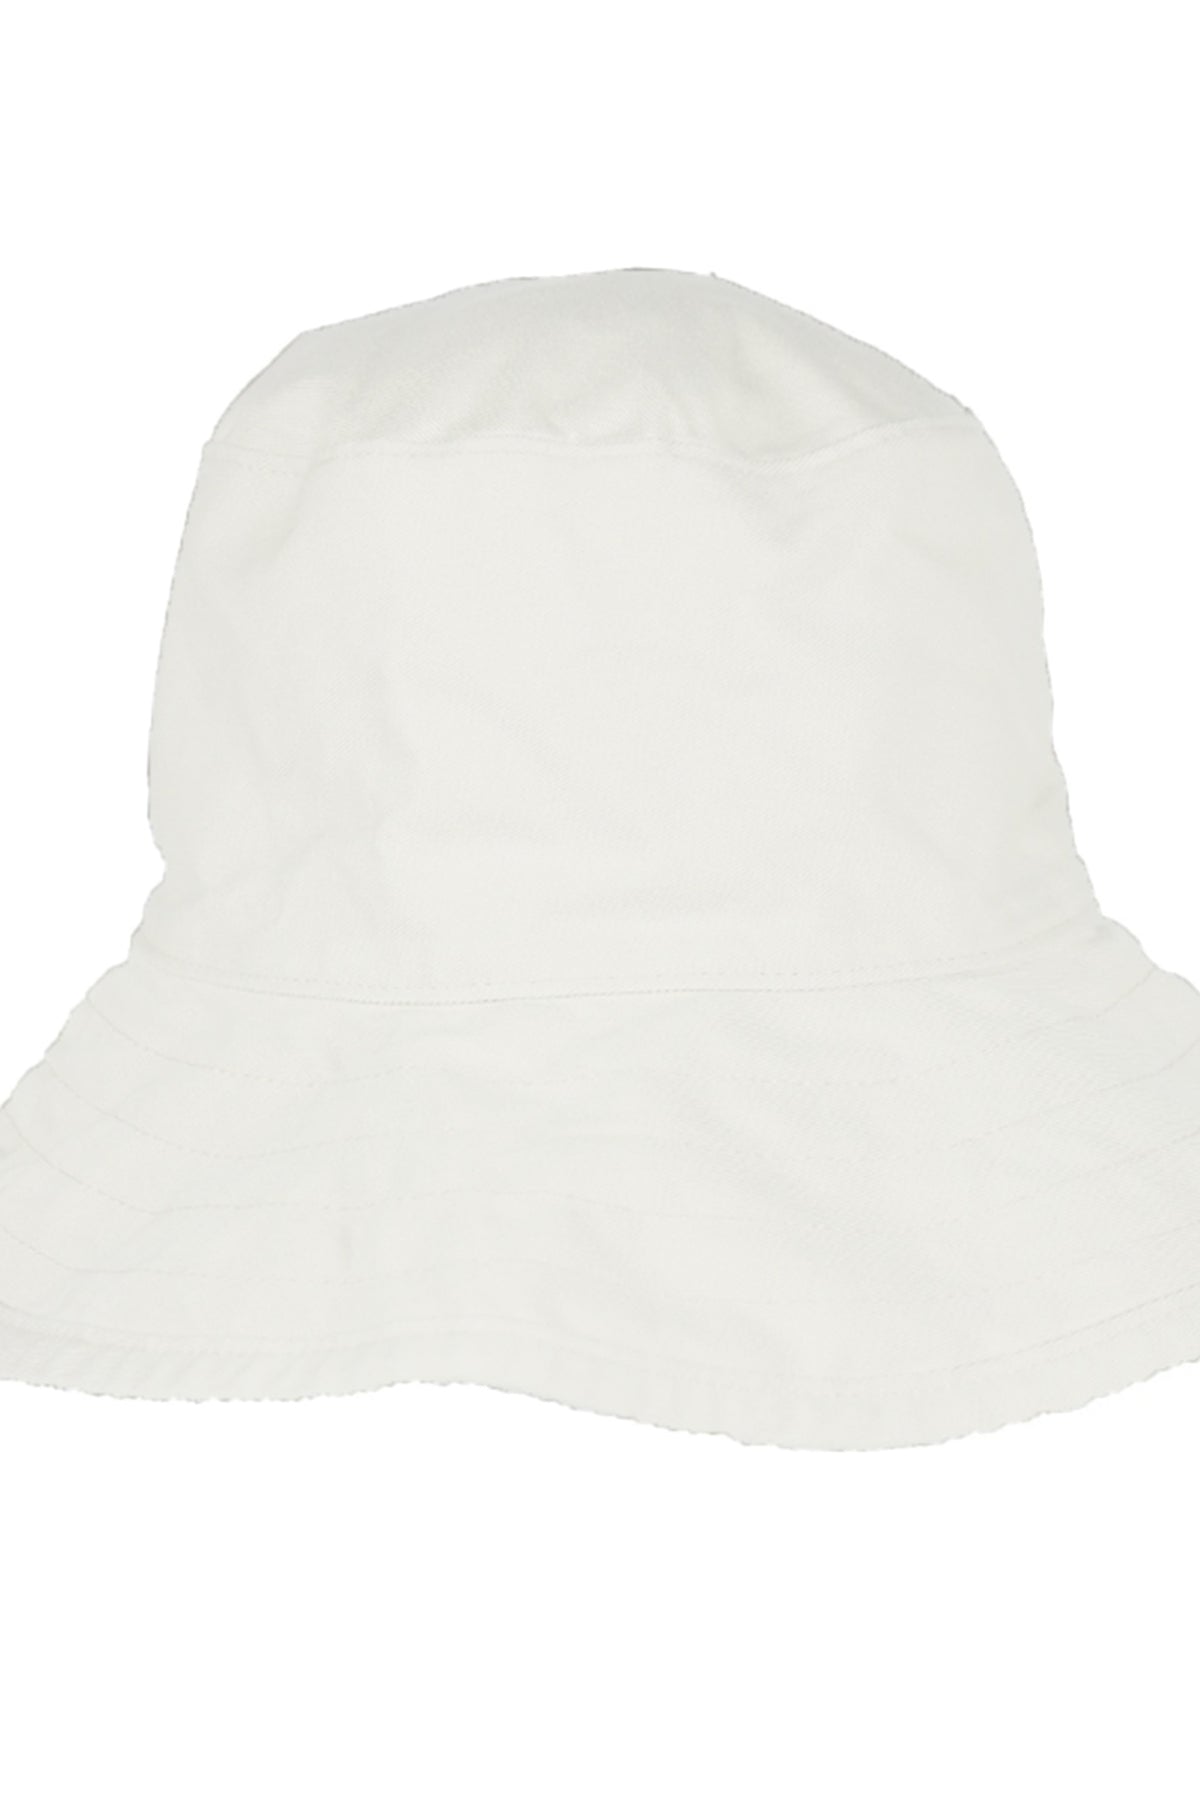   a Velvet by Graham & Spencer WASHED COTTON CRUSHER HAT on a white background. 